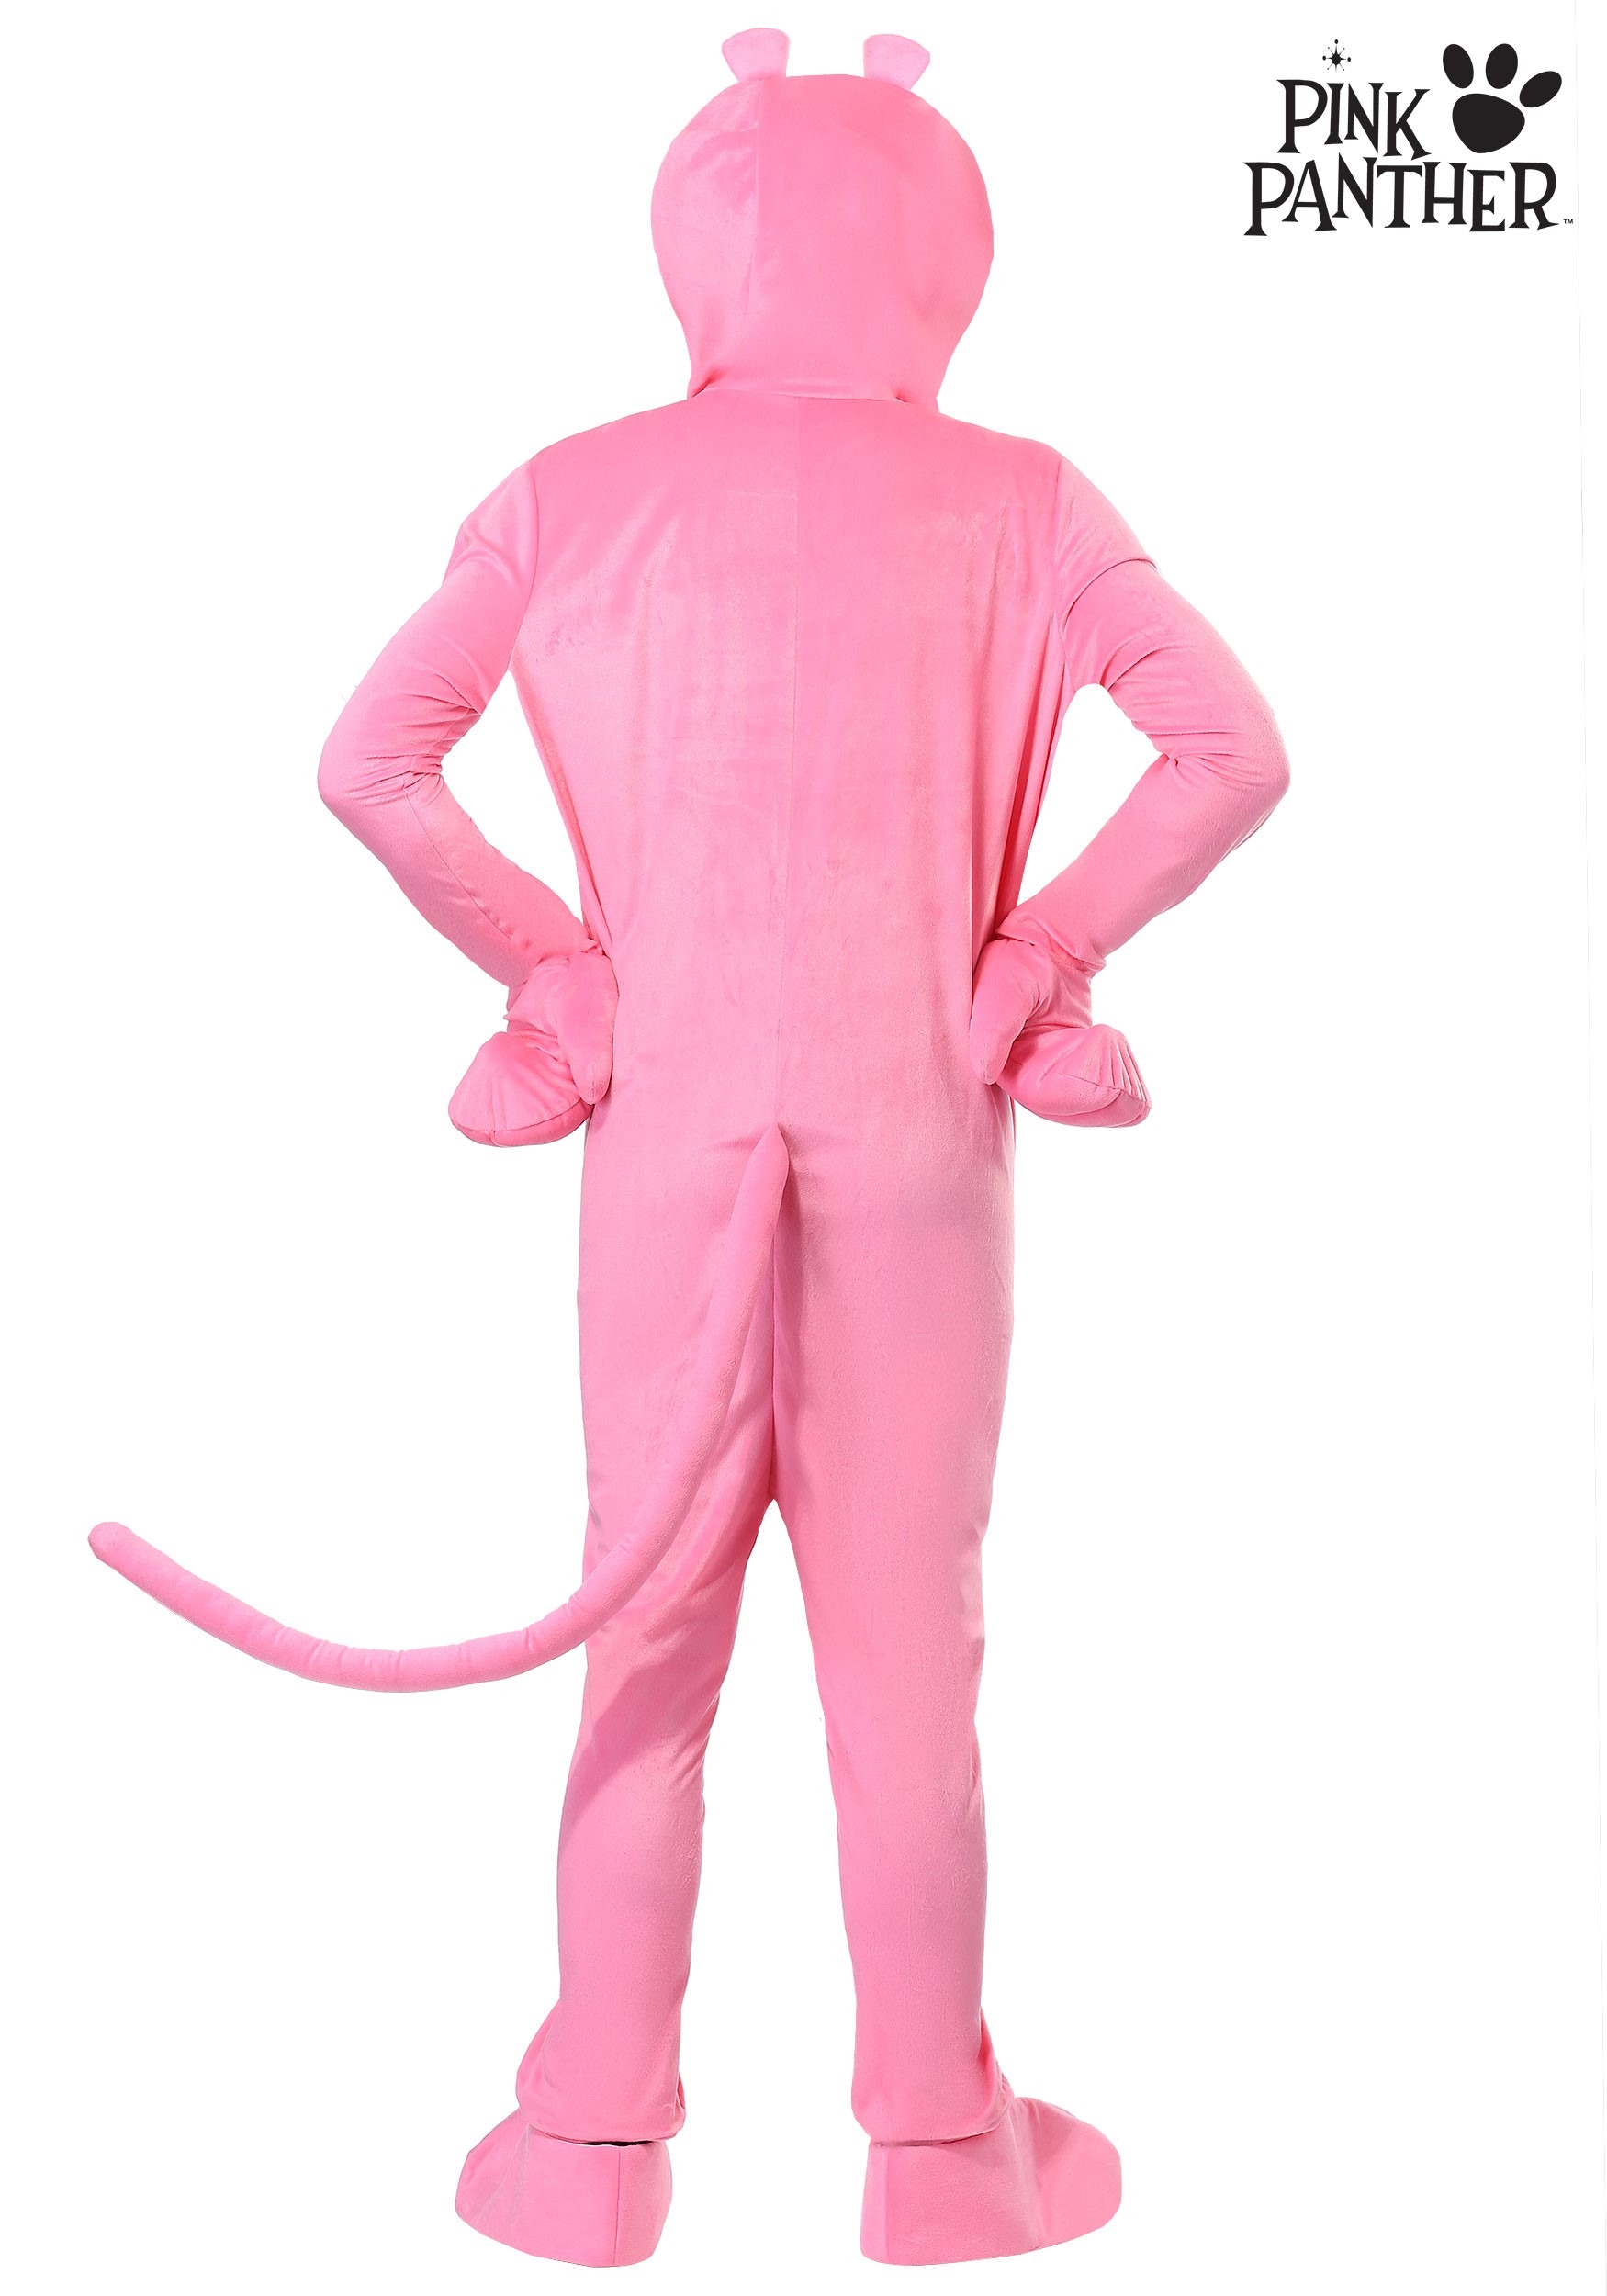 Plus Size The Pink Panther Costume.